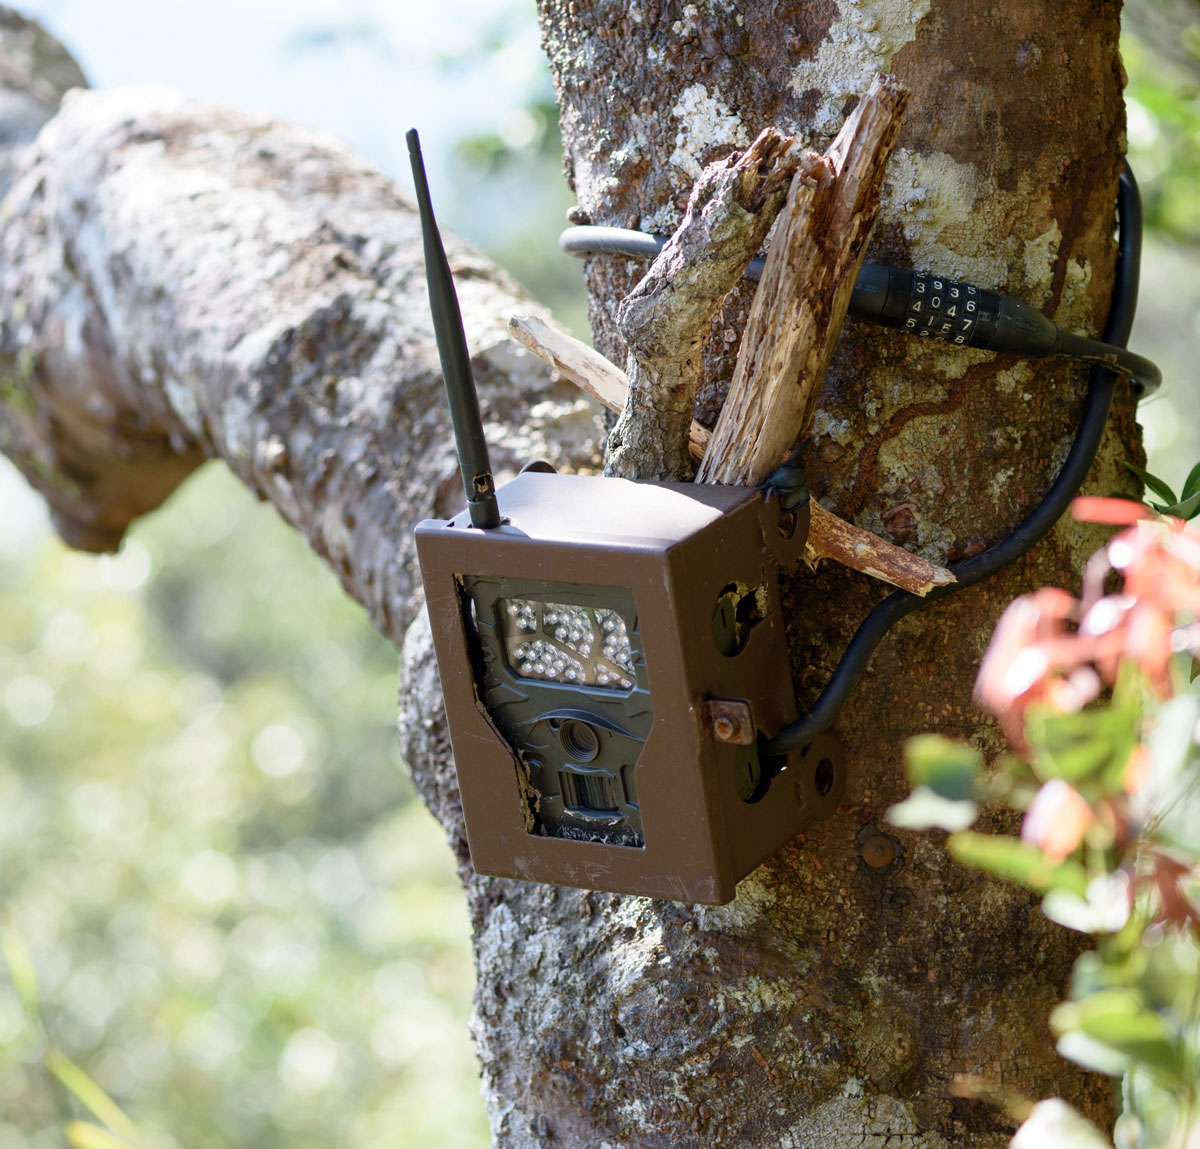 Trail cameras have changed deer scouting forever. Some advanced models can transmit photos to a hunter’s laptop or even his or her cell phone in real time.